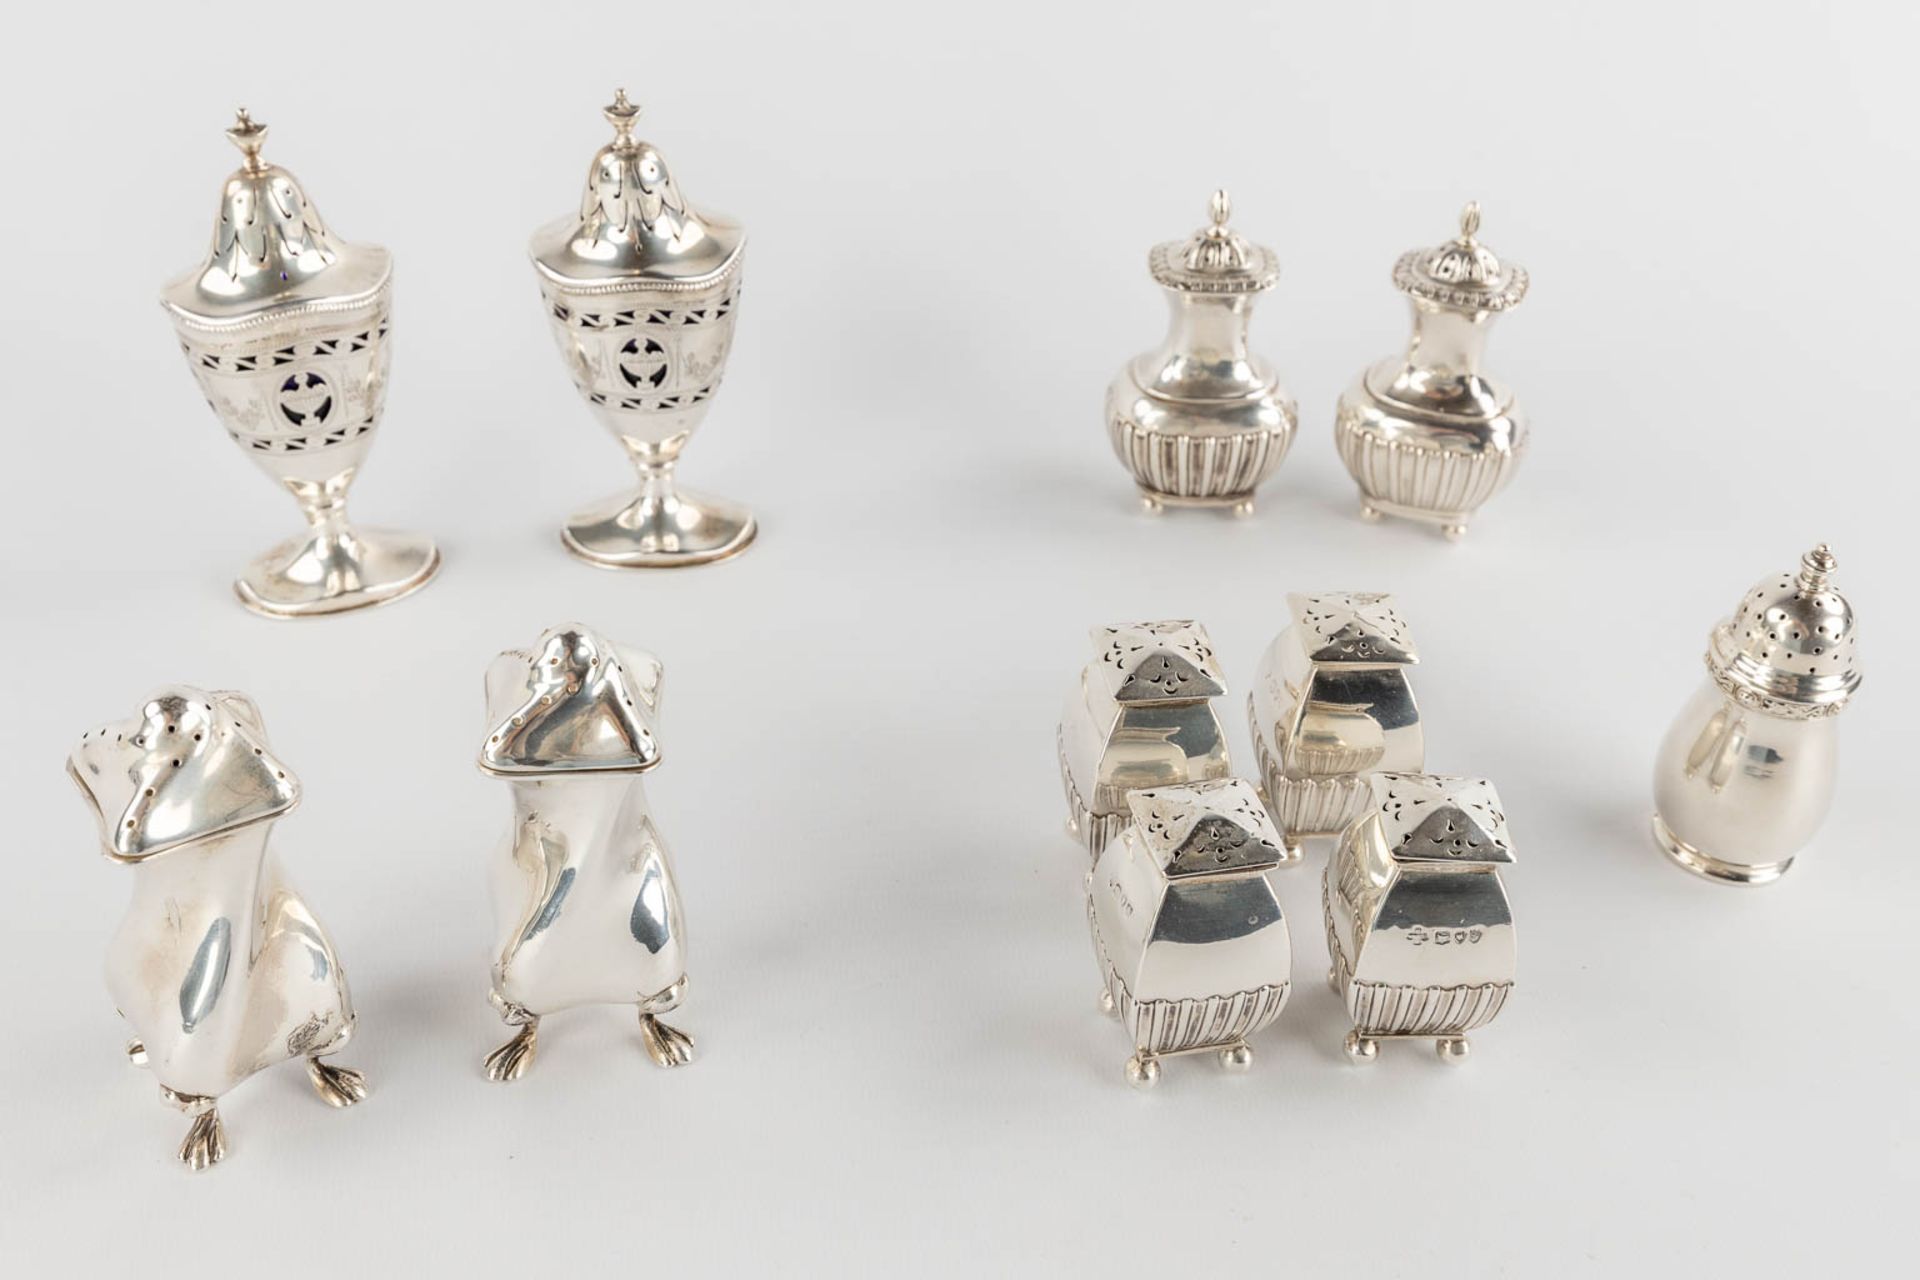 Large collection of silver items, Mostly England. 19th C. Total gross weight: 2915g. (W:22 x H:14 cm - Image 22 of 30